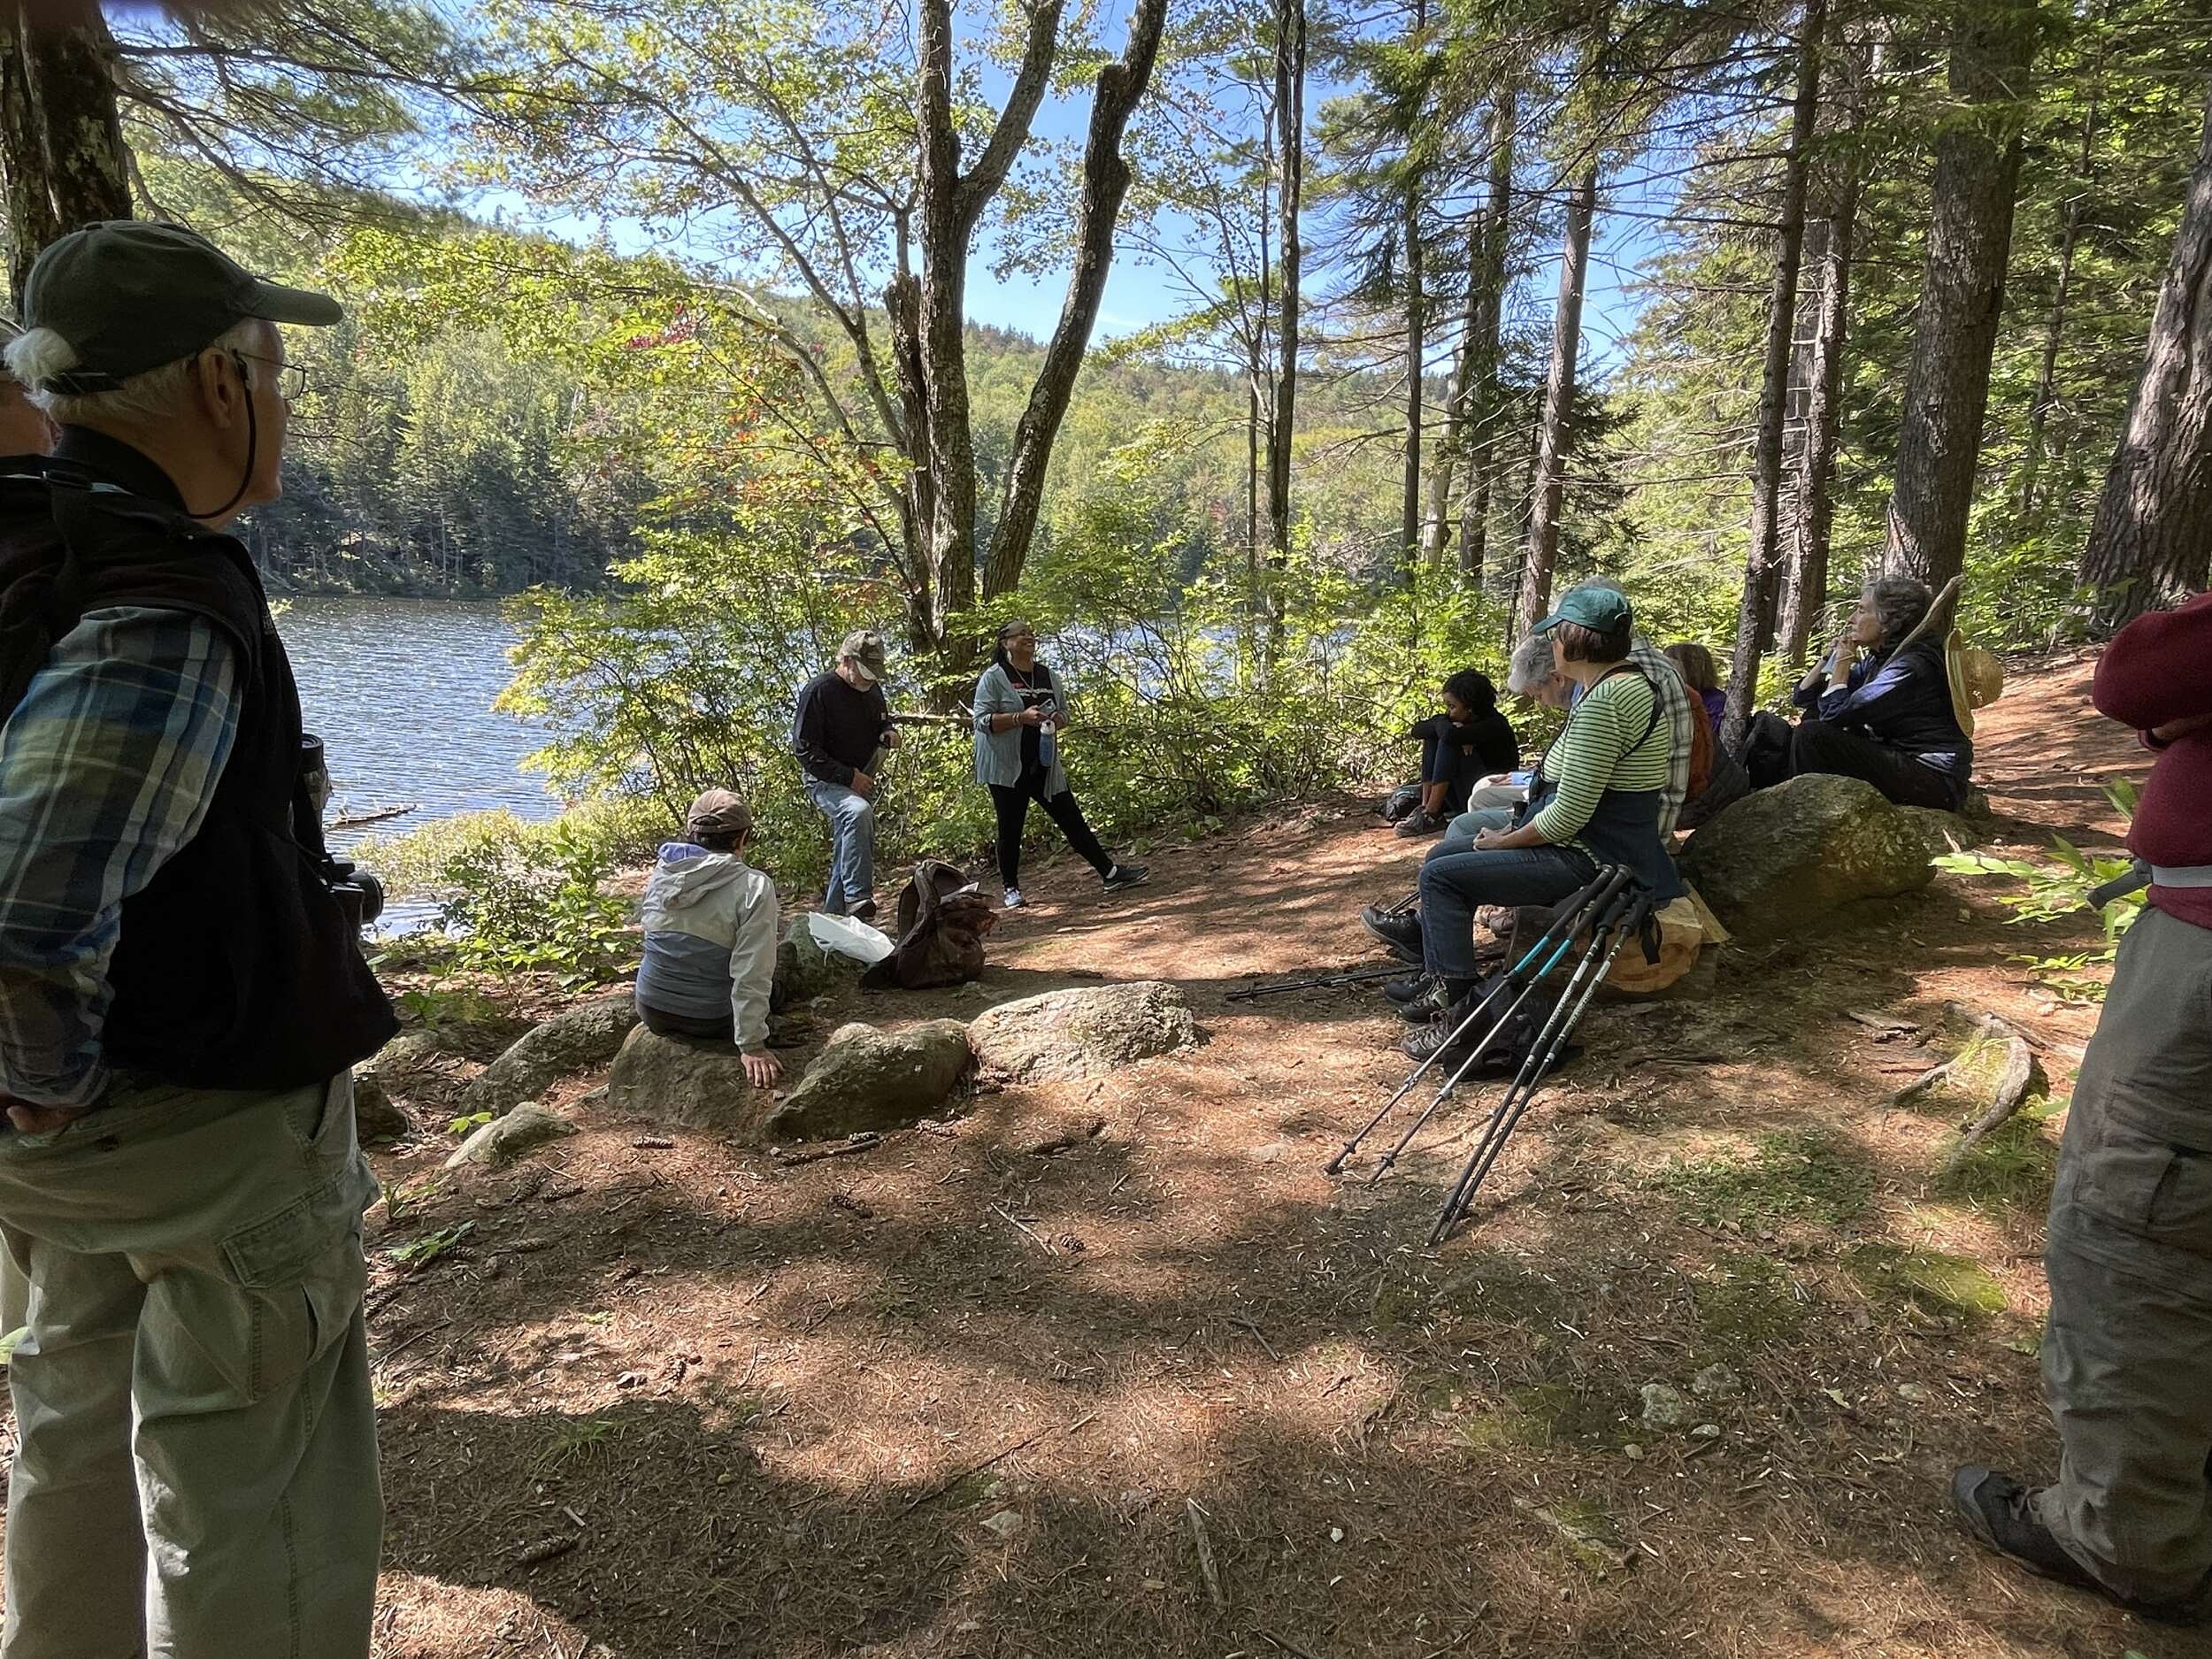 A group of people sit on the edge of Jack's Pond, listening to a speaker. (photo © Susie Spikol)